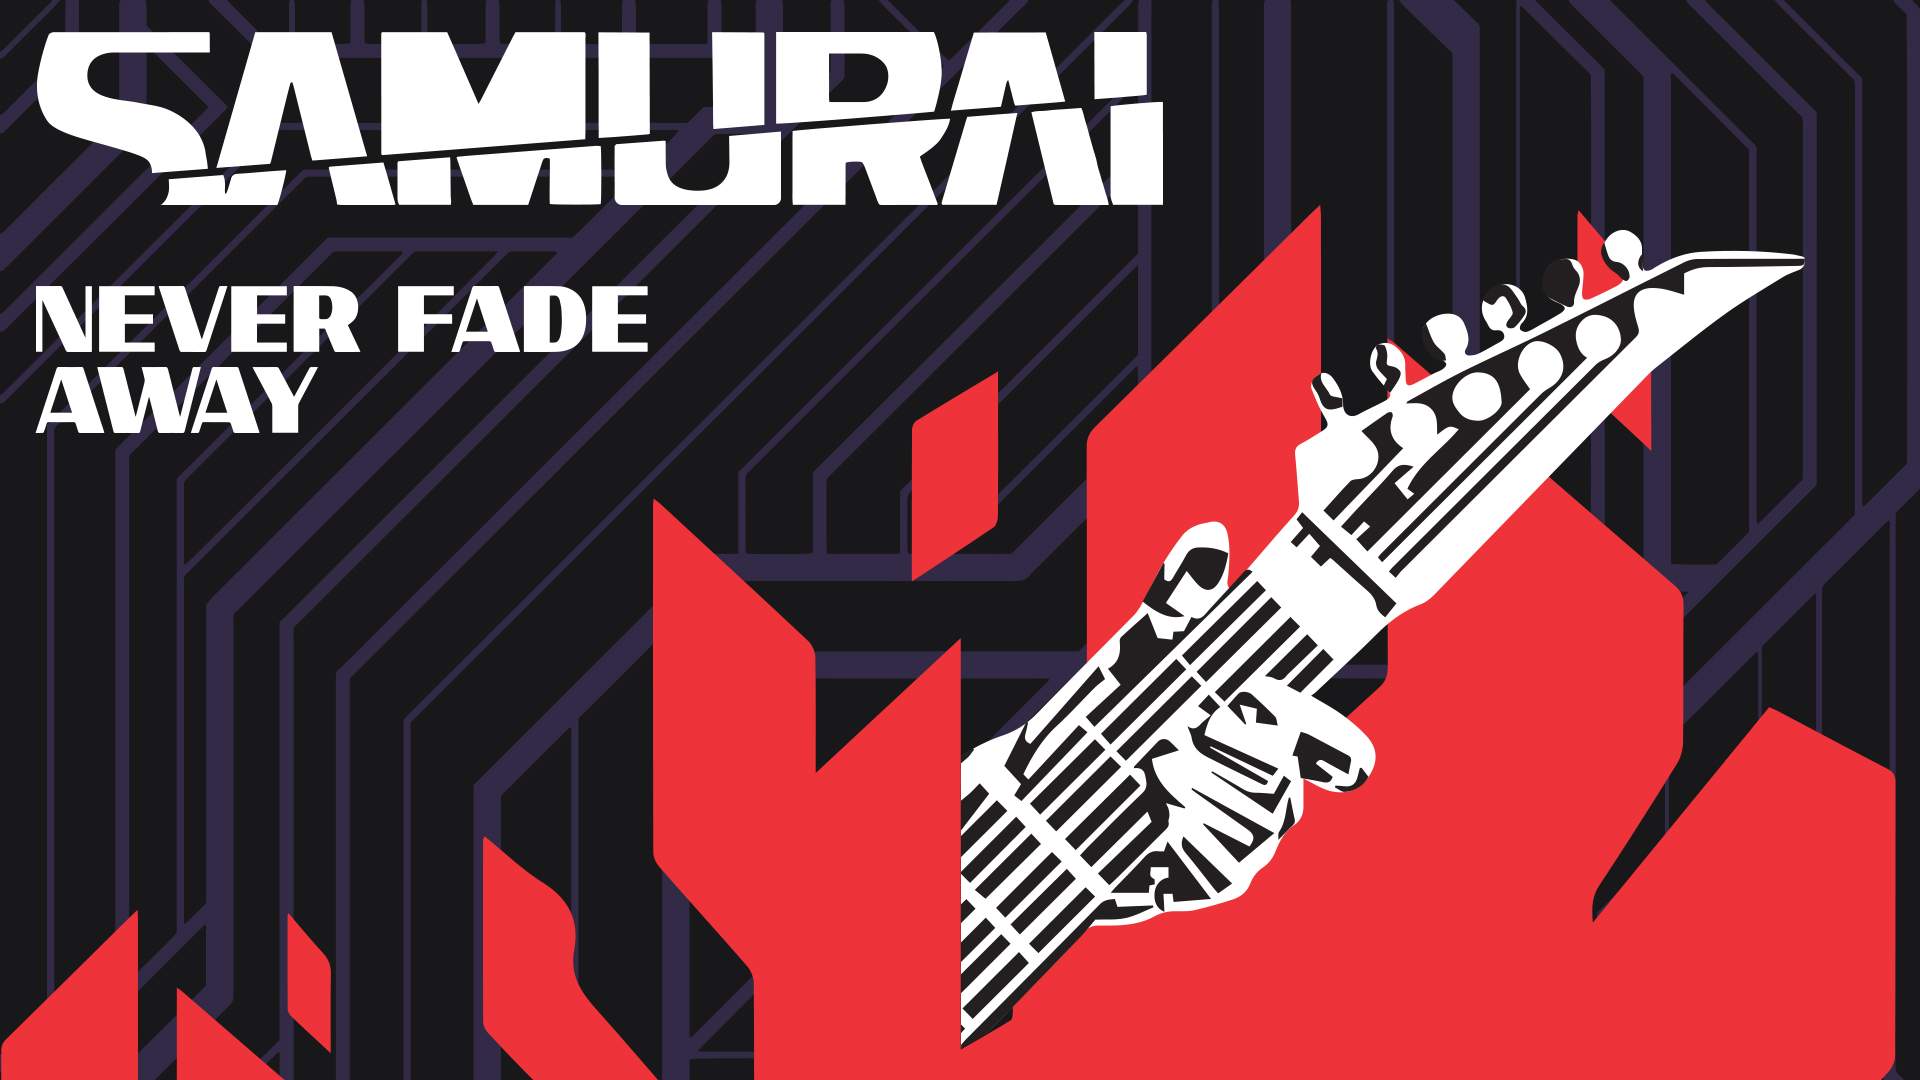 Never Fade Away By Samurai Refused Cyberpunk 2077 From The Creators Of The Witcher 3 Wild Hunt